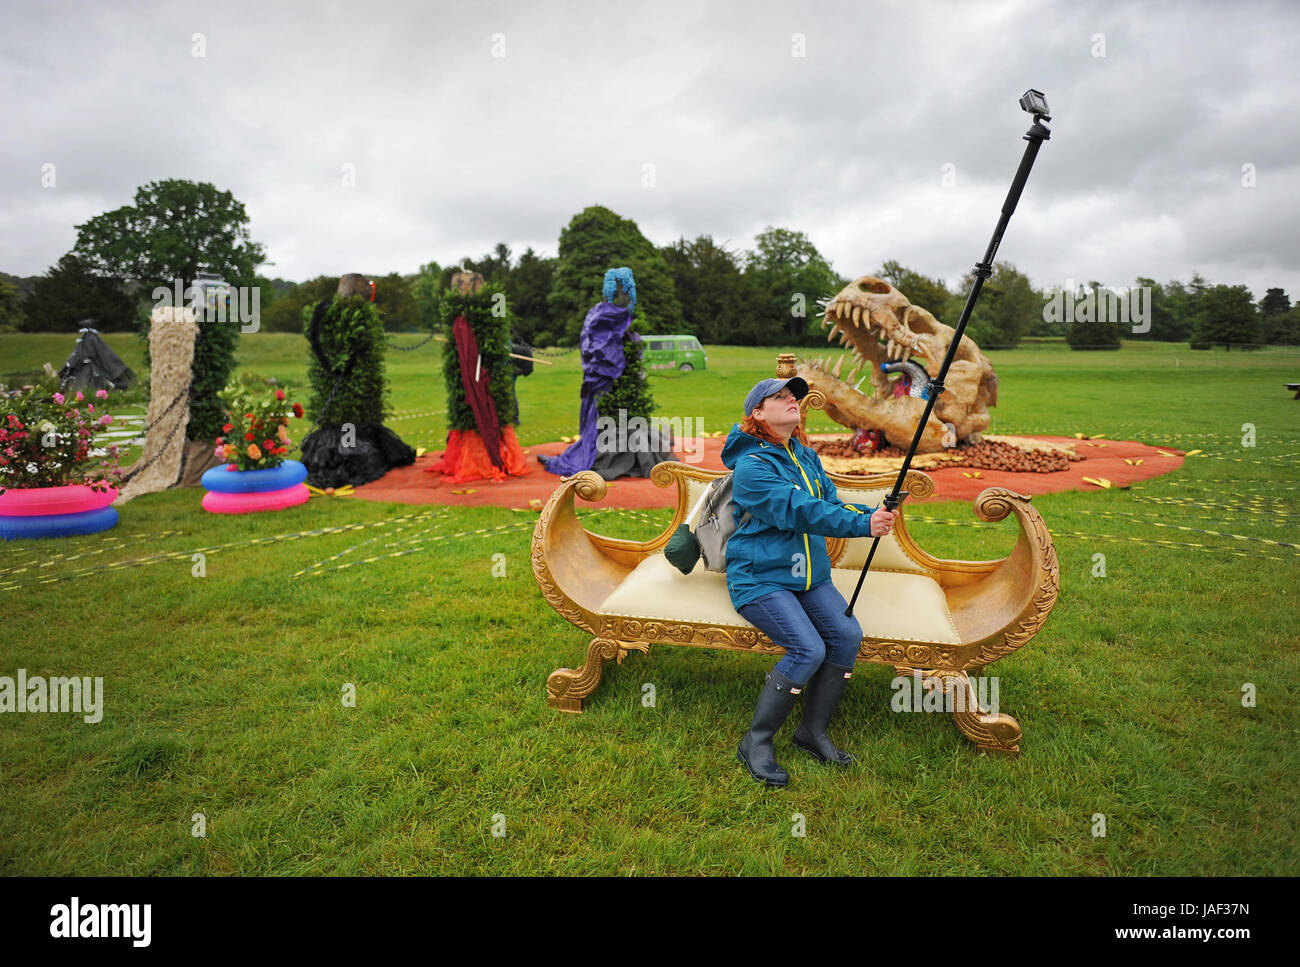 Chatsworth, Derbyshire, UK. 6th June, 2017. 6th June 2017. Chatsworth Royal Horticultural Society Flower Show. Picture shows Tracy Burfield stops to take a selfie on one of the display gardens at the Chatsworth RHS Flower Show at Chatsworth House in Derbyshire. Credit: Howard Walker/Alamy Live News Stock Photo